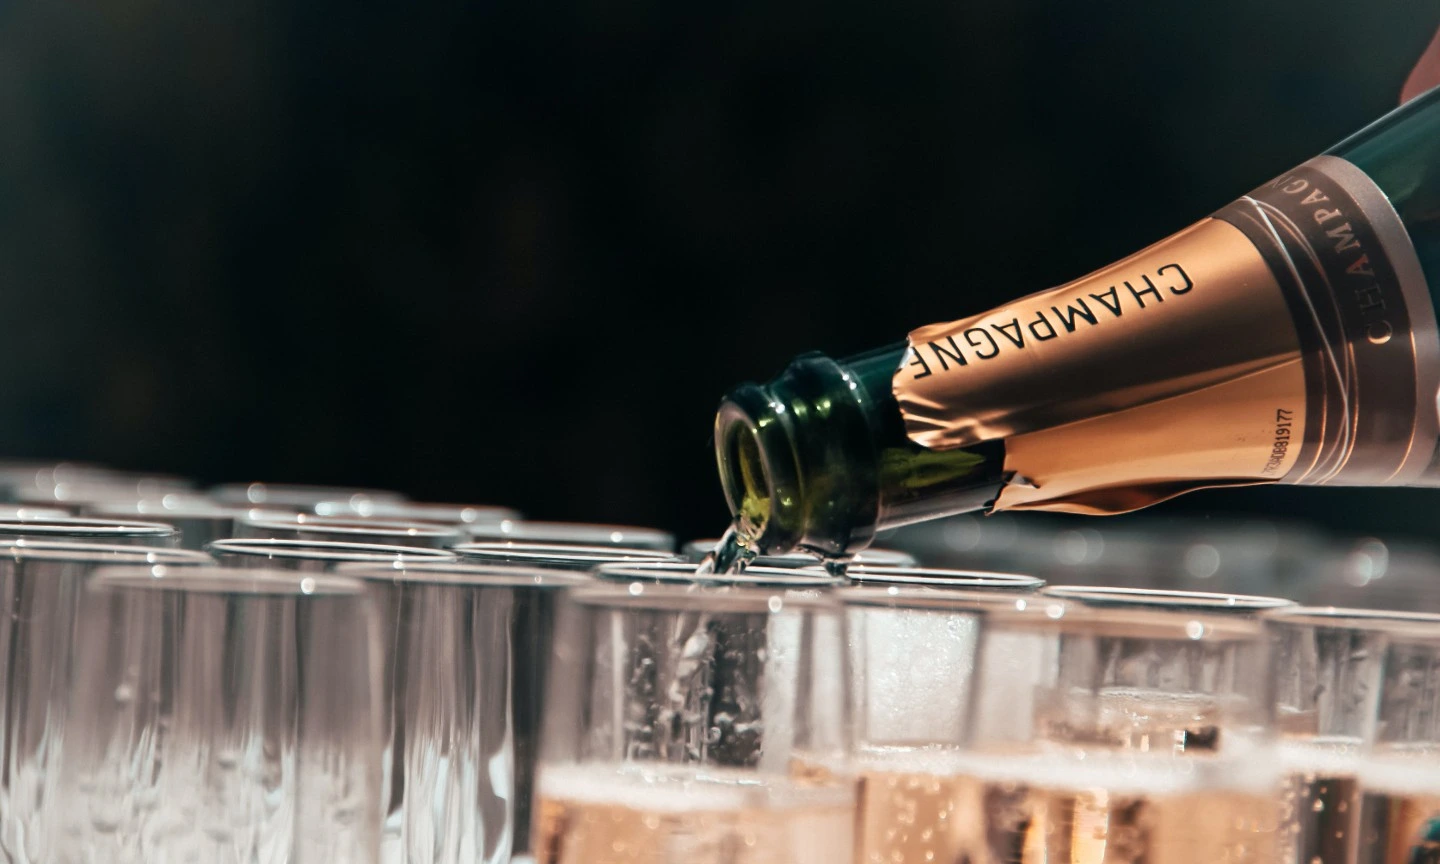 Glasses being filled with Champagne. Photo by tristan gassert via unsplash